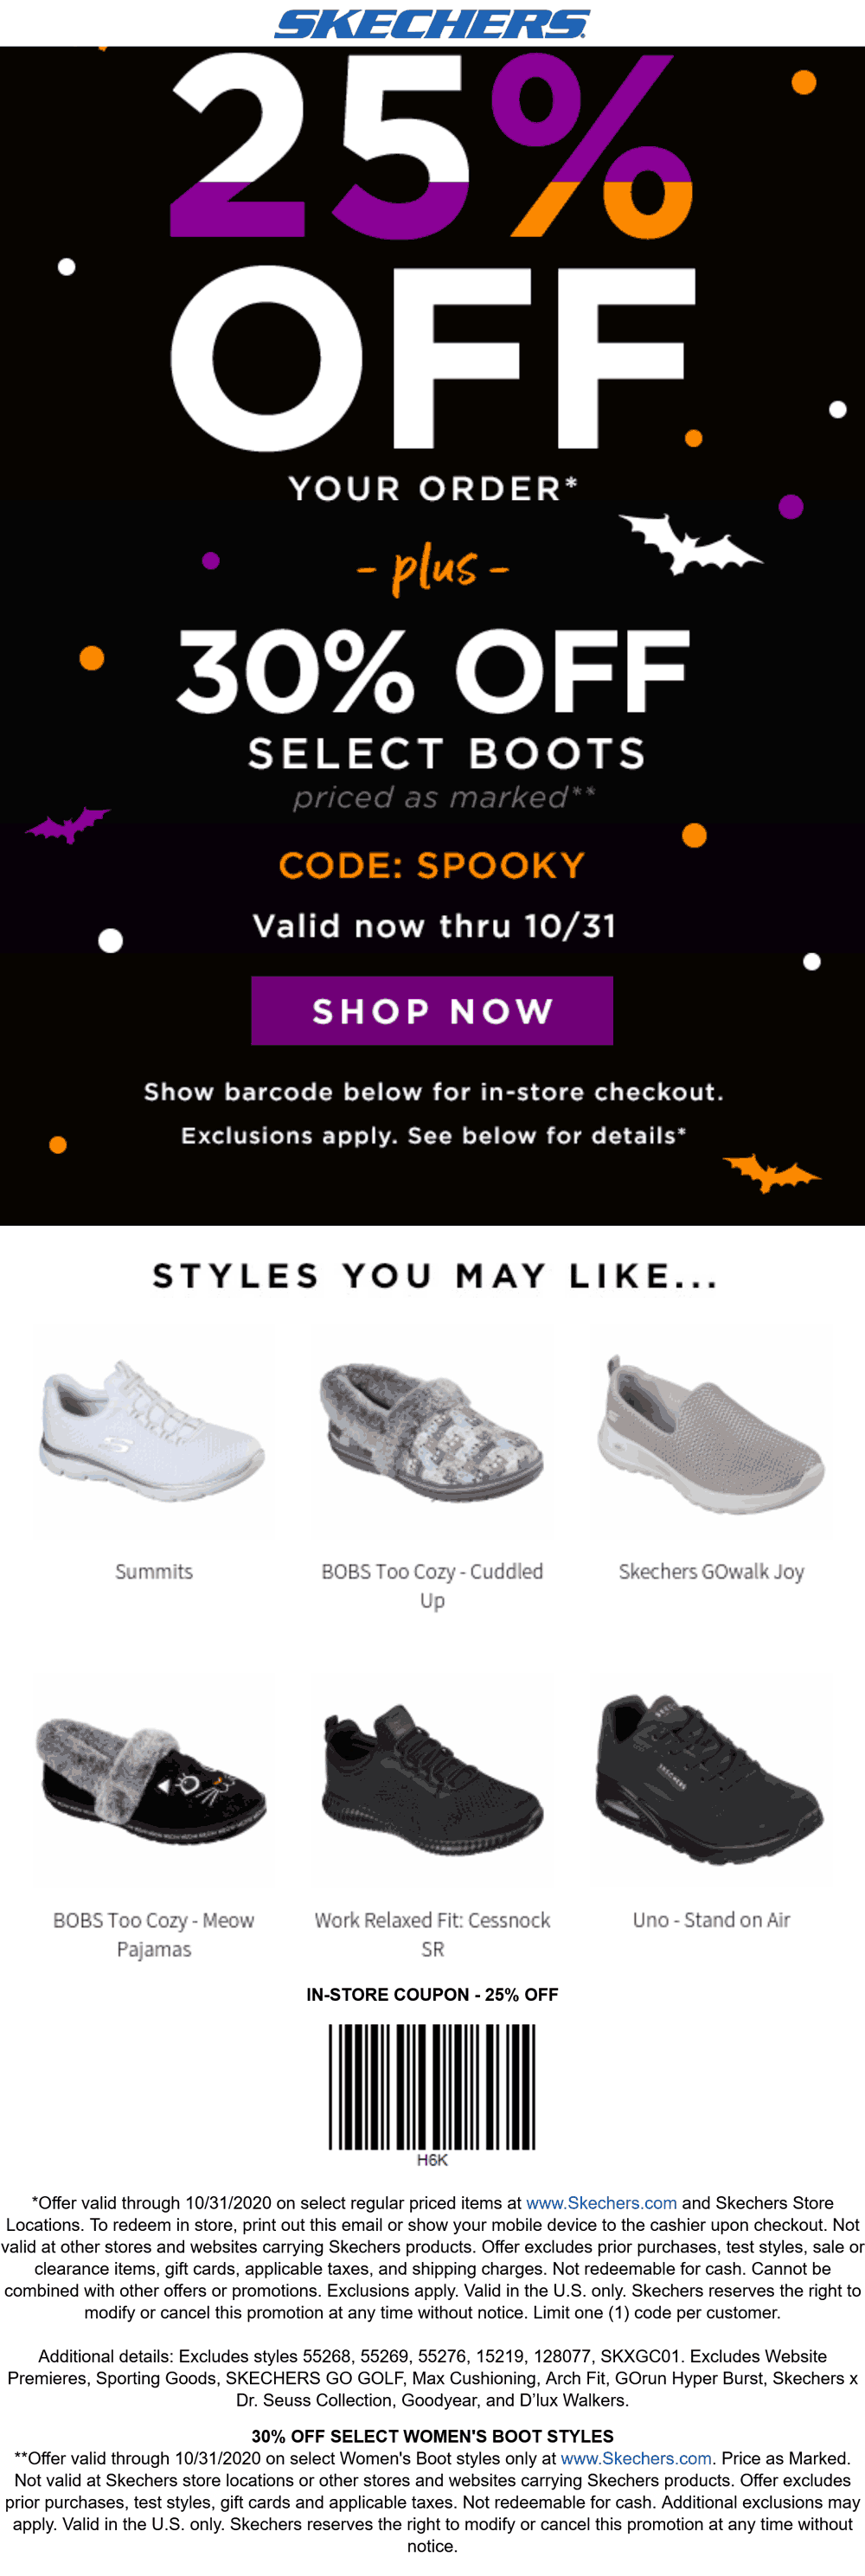 Skechers stores Coupon  25% off & more at Skechers, or online via promo code SPOOKY #skechers 